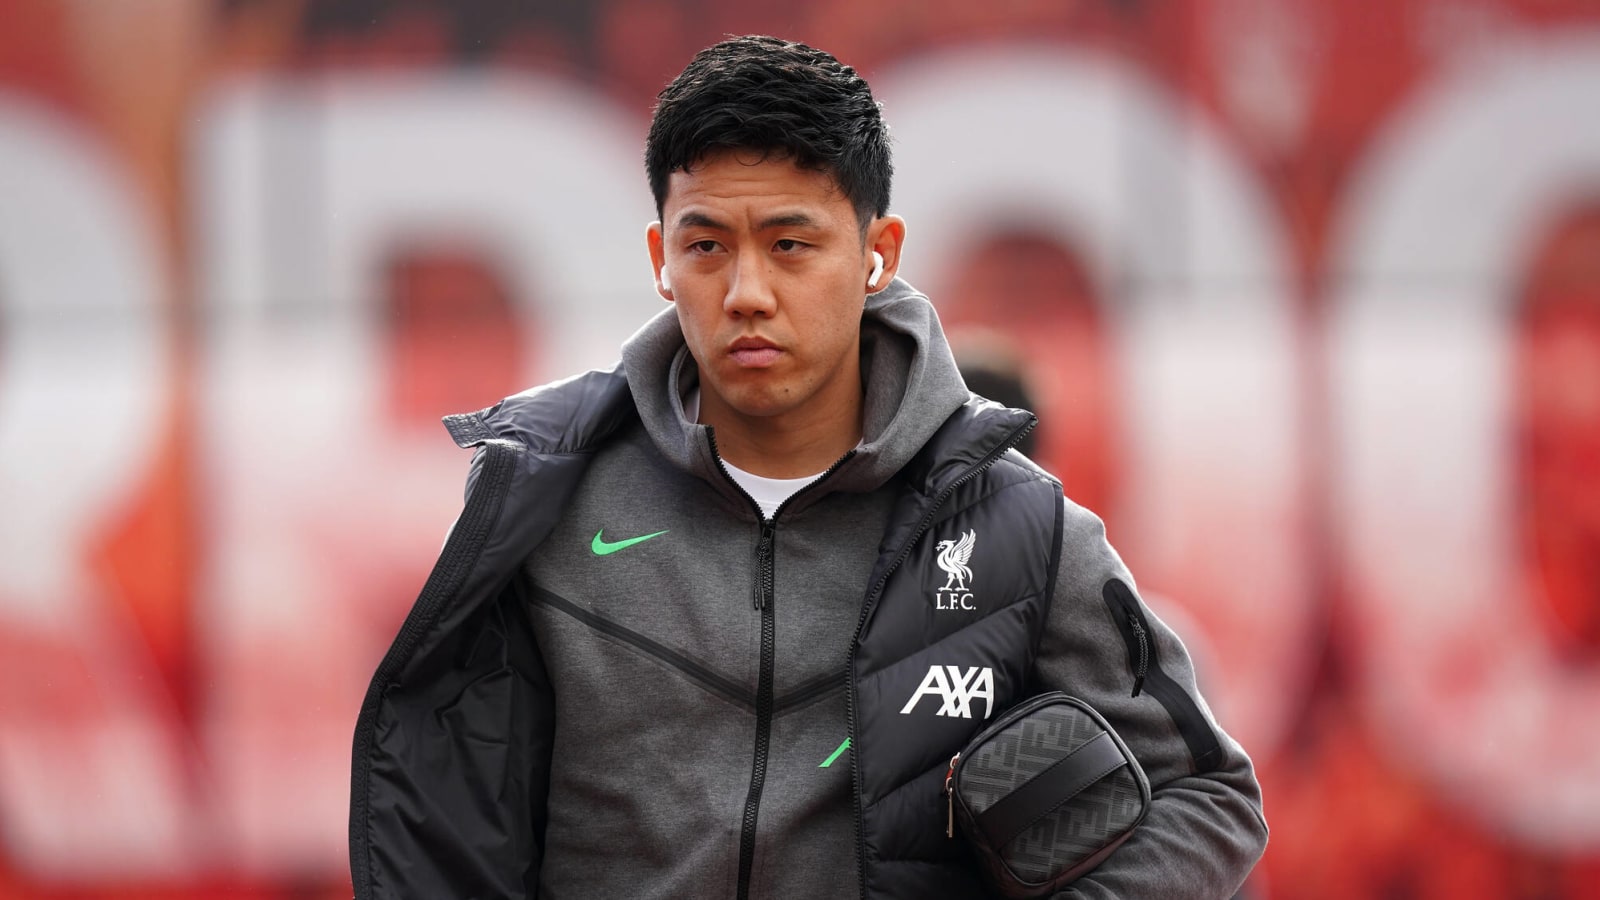 Wataru Endo returns to Liverpool earlier than expected due to ‘unforeseen’ circumstances